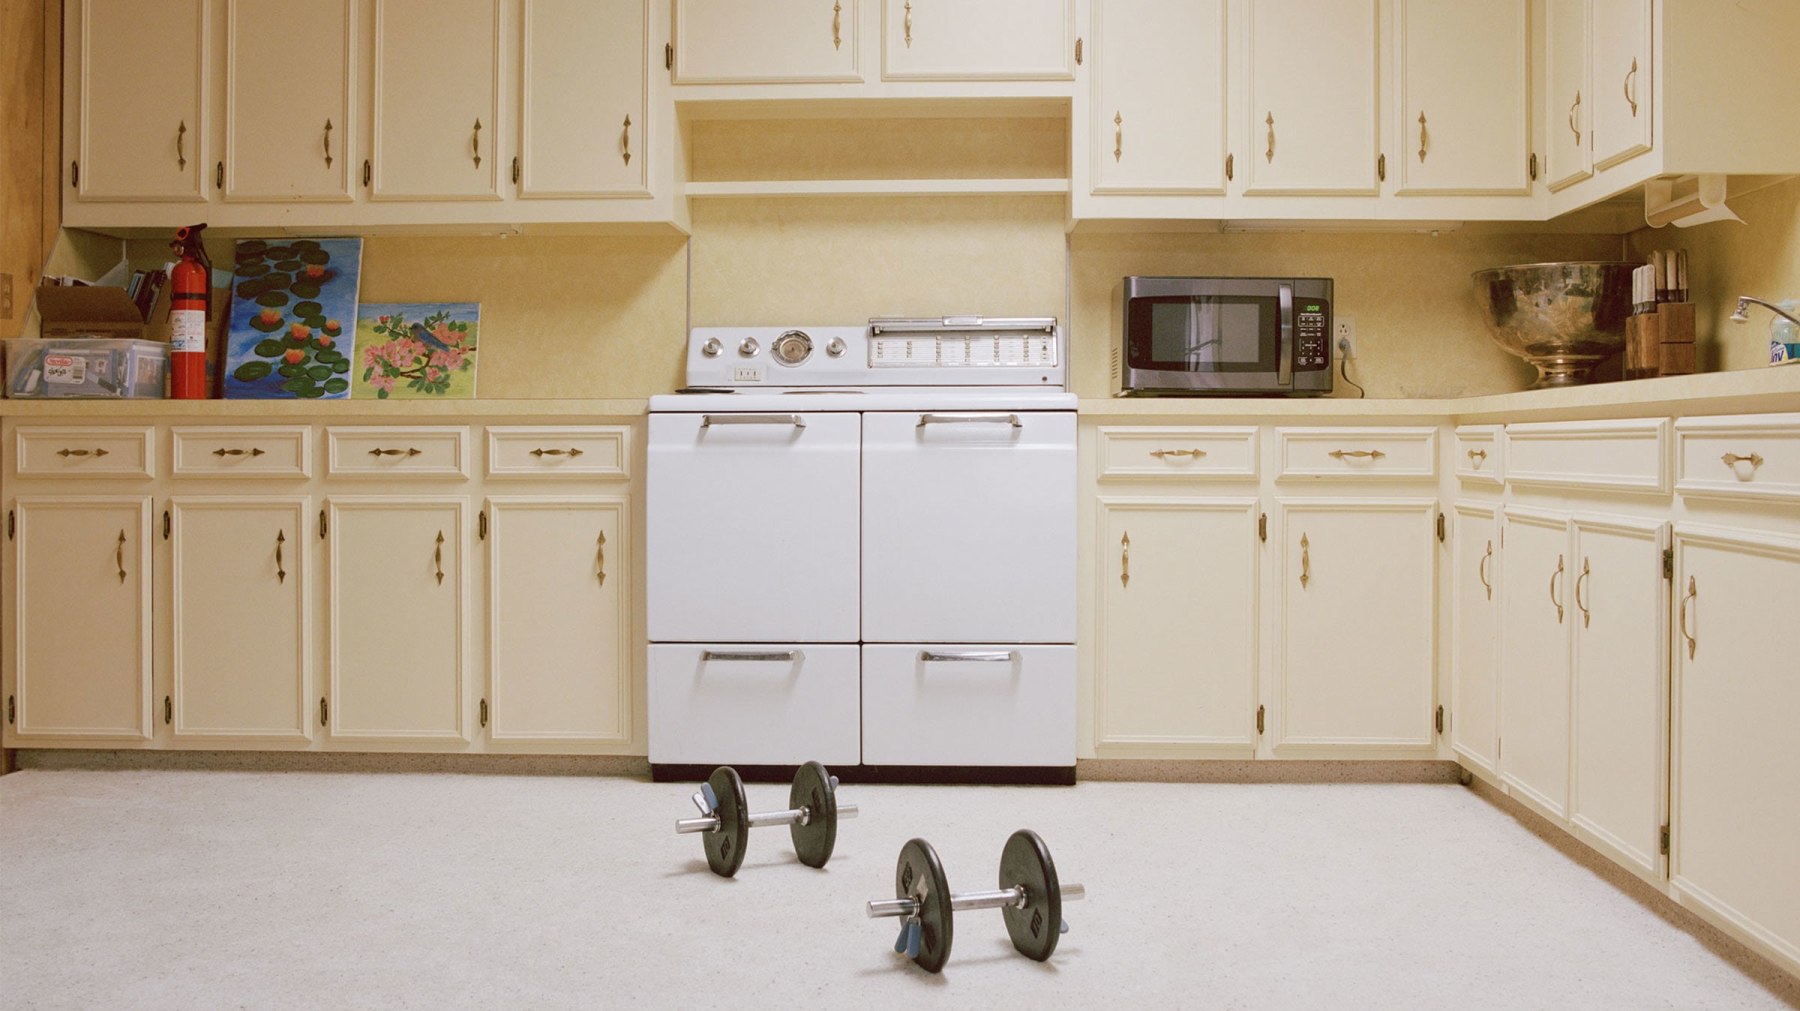 An empty kitchen with yellow cabinets and 2 barbells on the floor in front of a stove